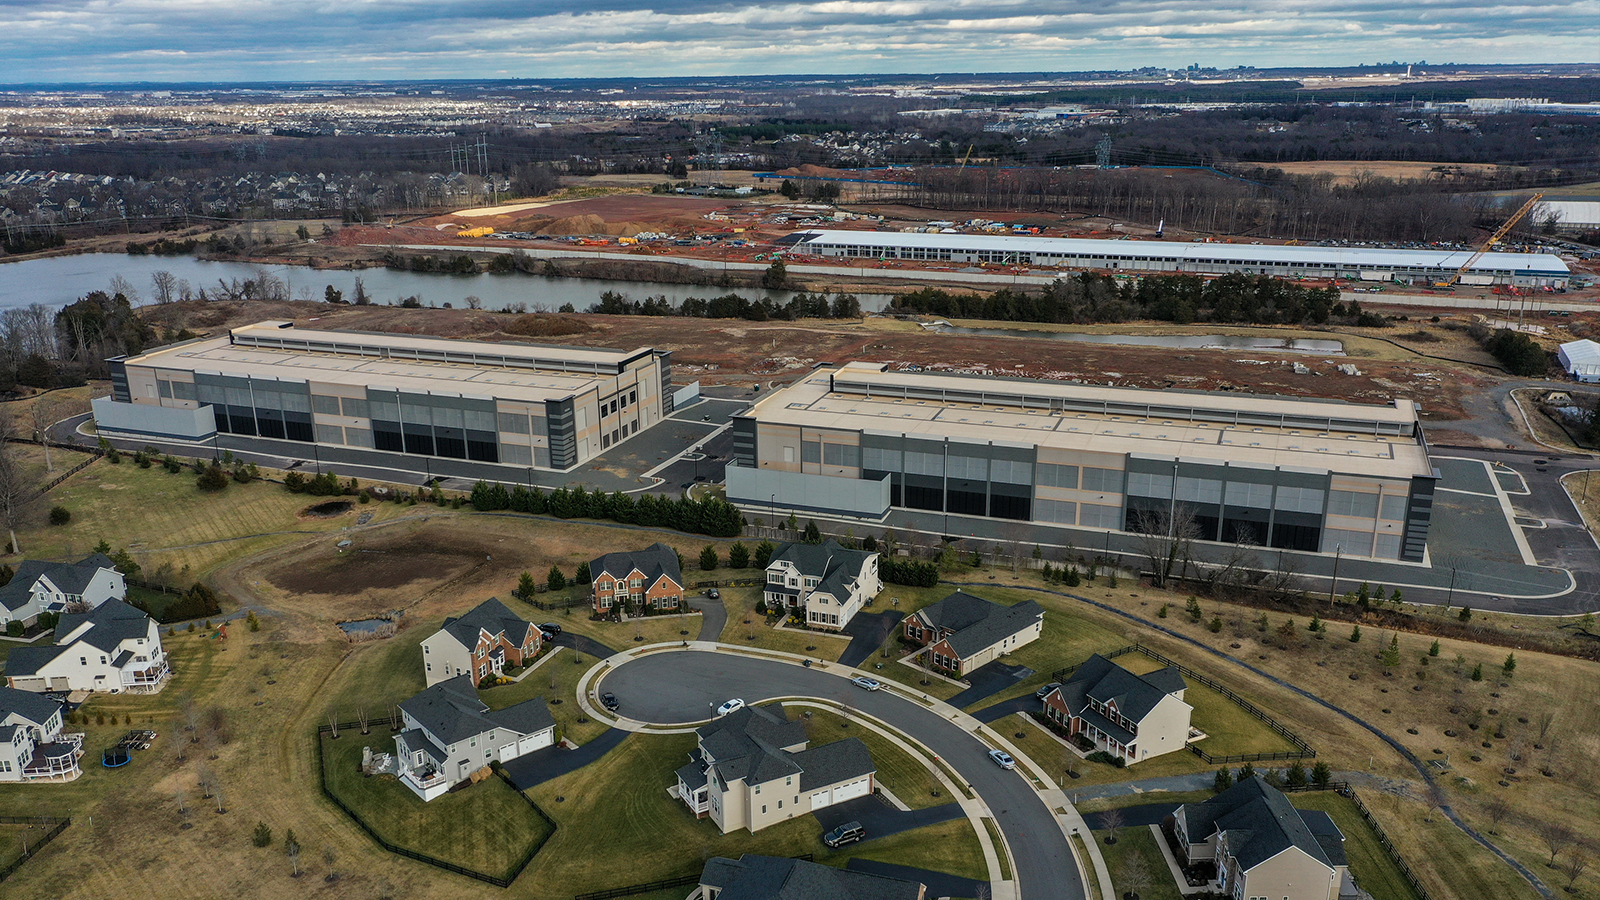 Amazon data centers are being built 50 feet from homes in Loudoun County, Virginia.